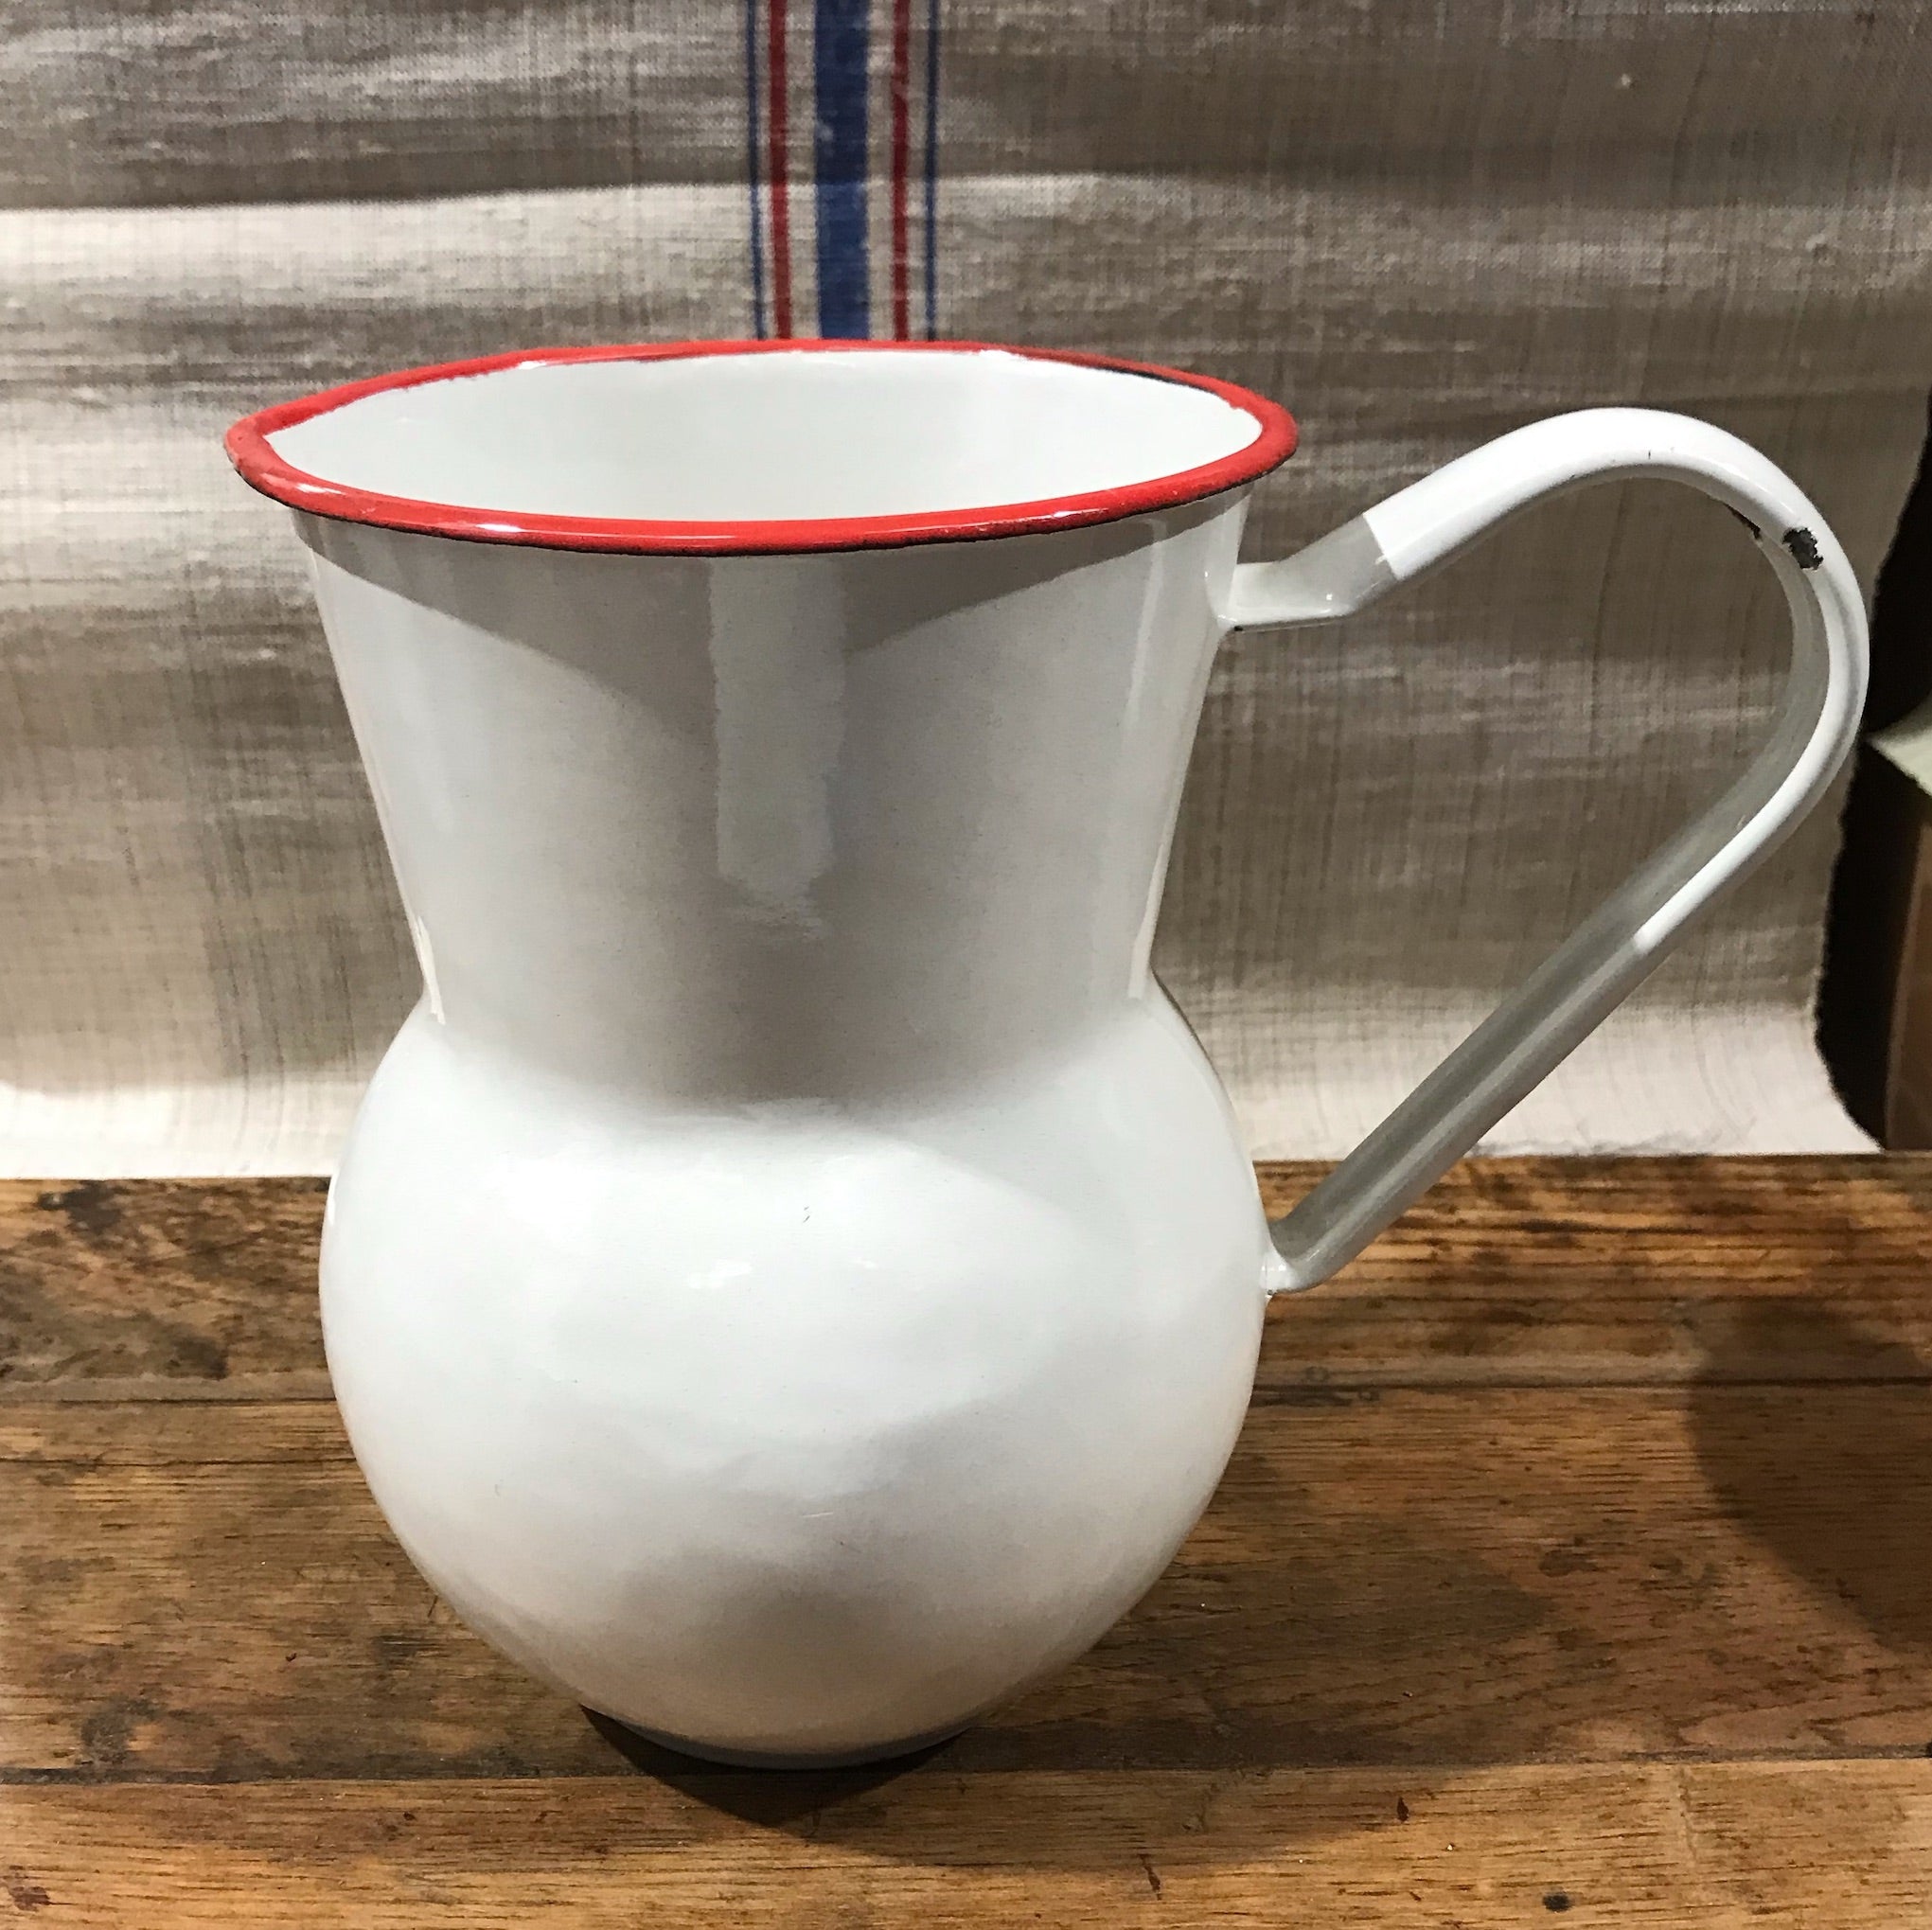 Old Stock (Never Used) European Enamel Pitcher #4024